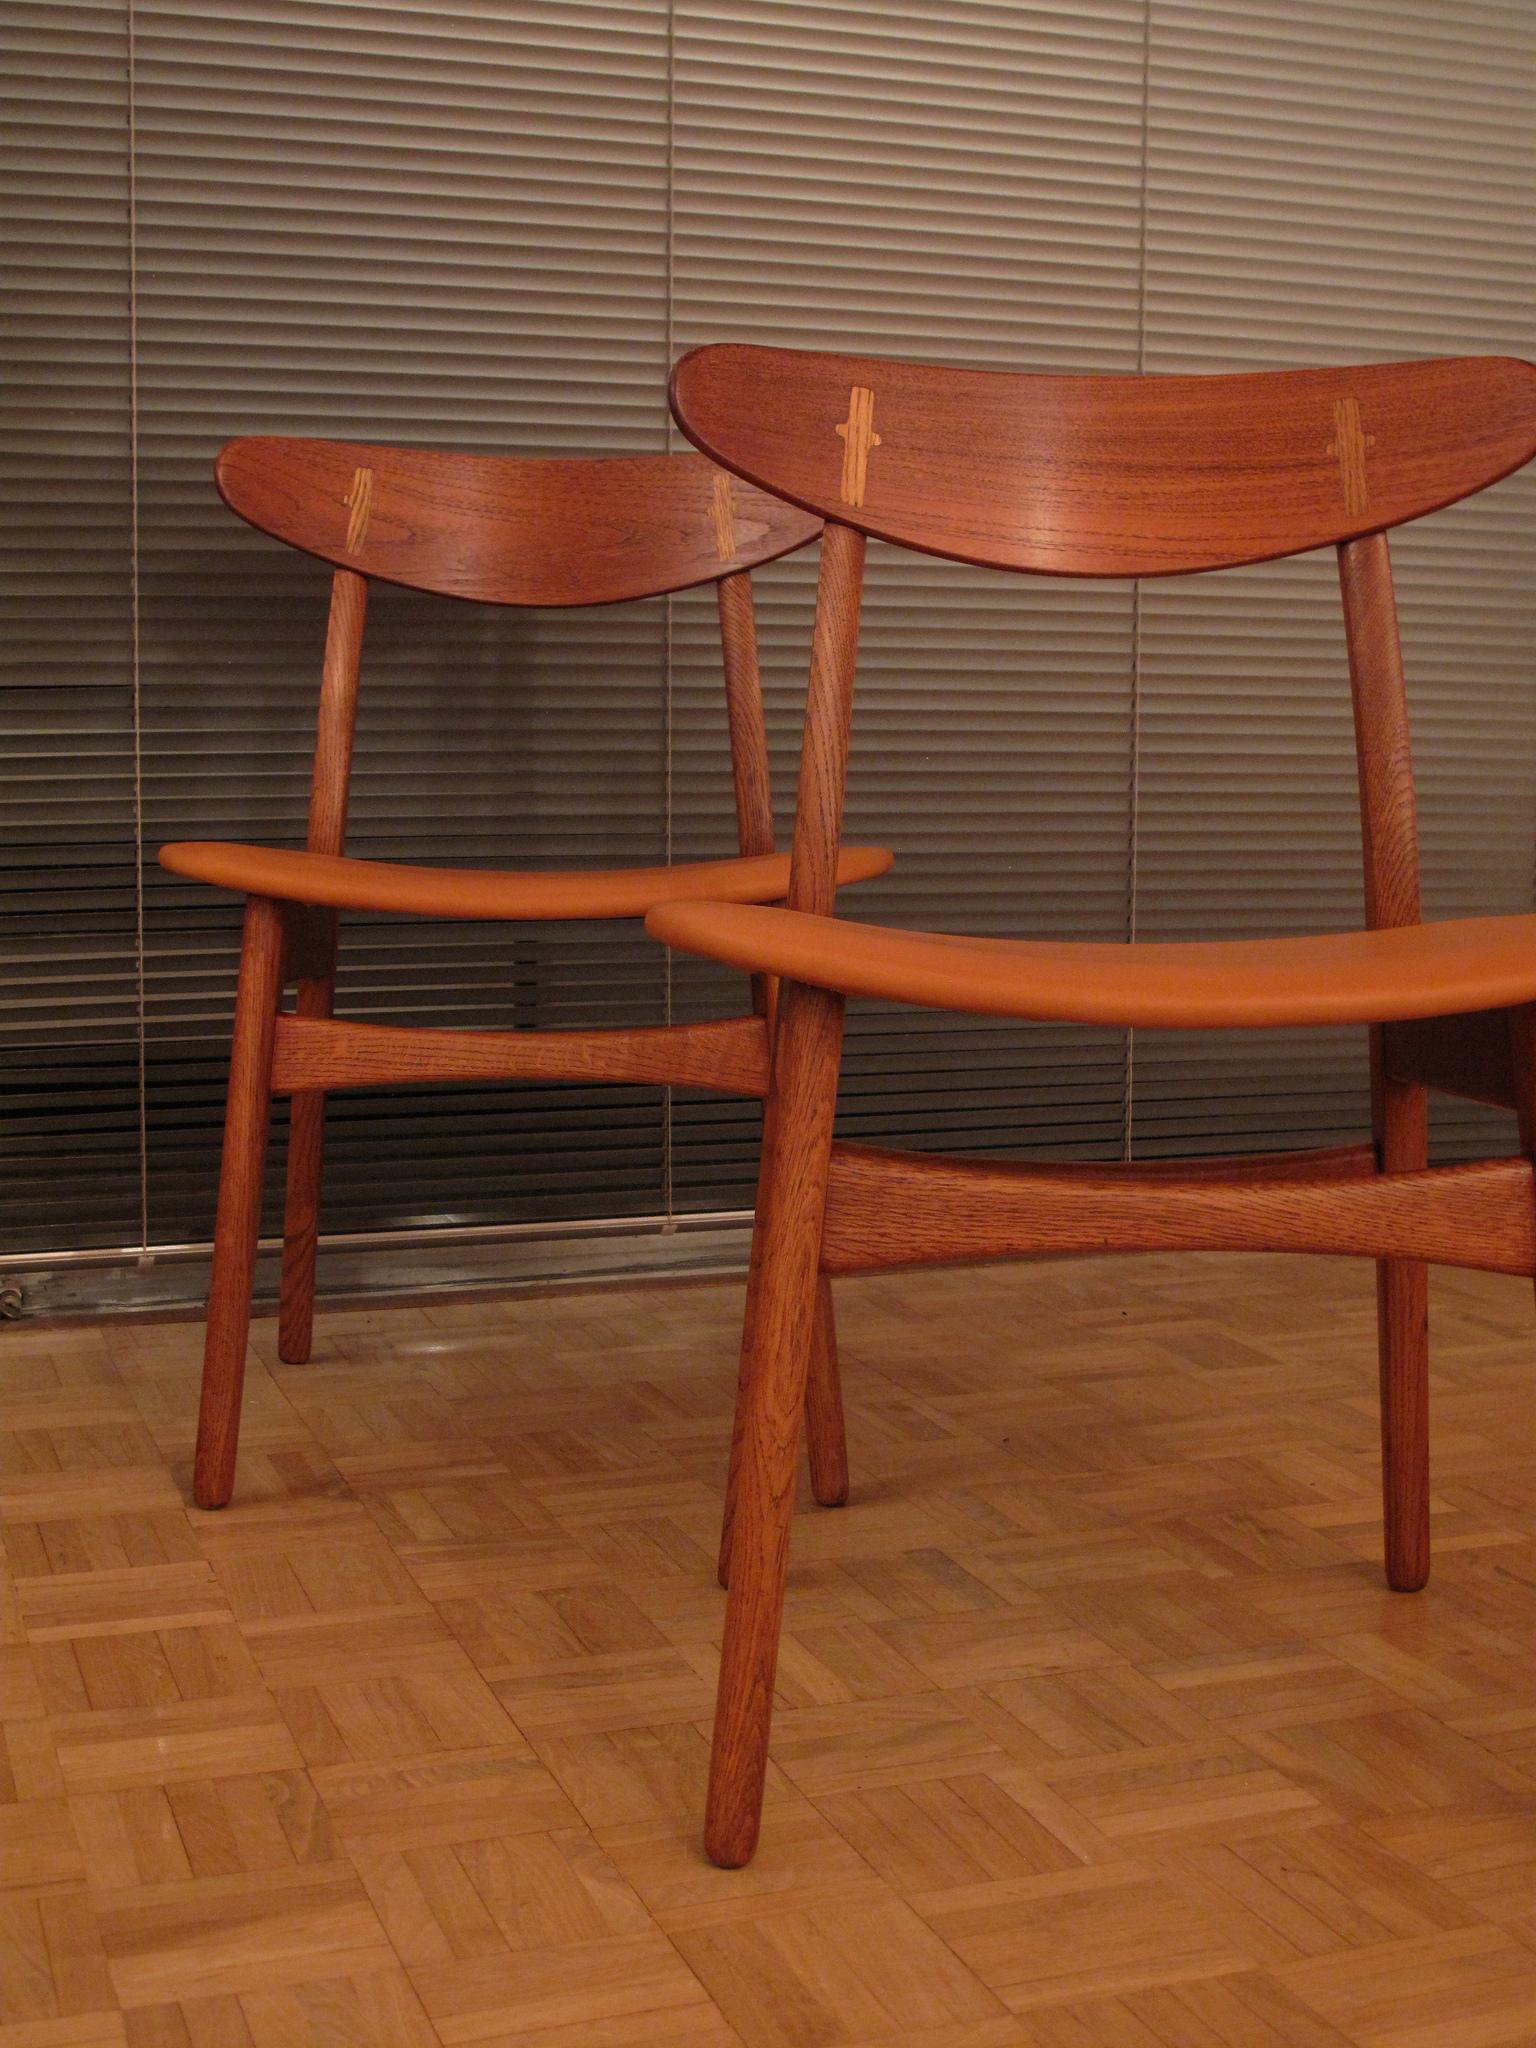 An exceptionally nice pair of Hans Wegner CH30 chairs just upholstered in premium quality tan leather. The color of the leather works perfectly with the honeyed Oak and contrasting teak backrests. We have kept the seat pads thin to accentuate the